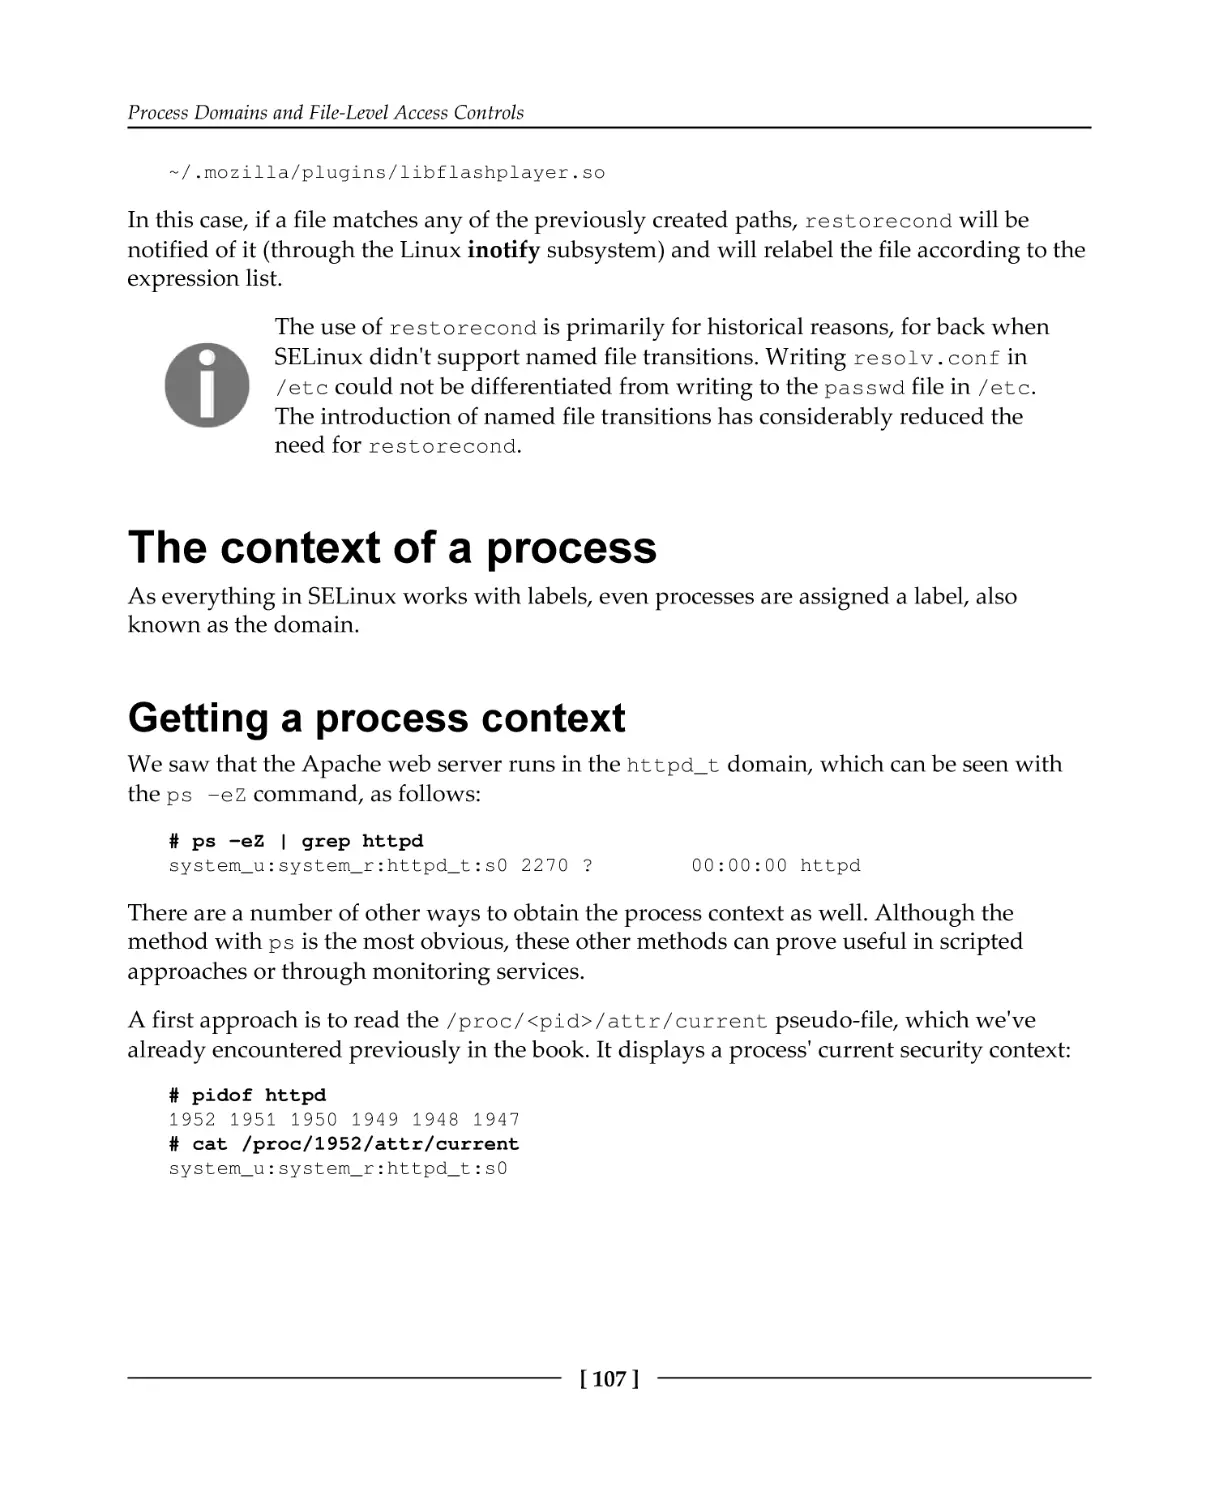 The context of a process
Getting a process context